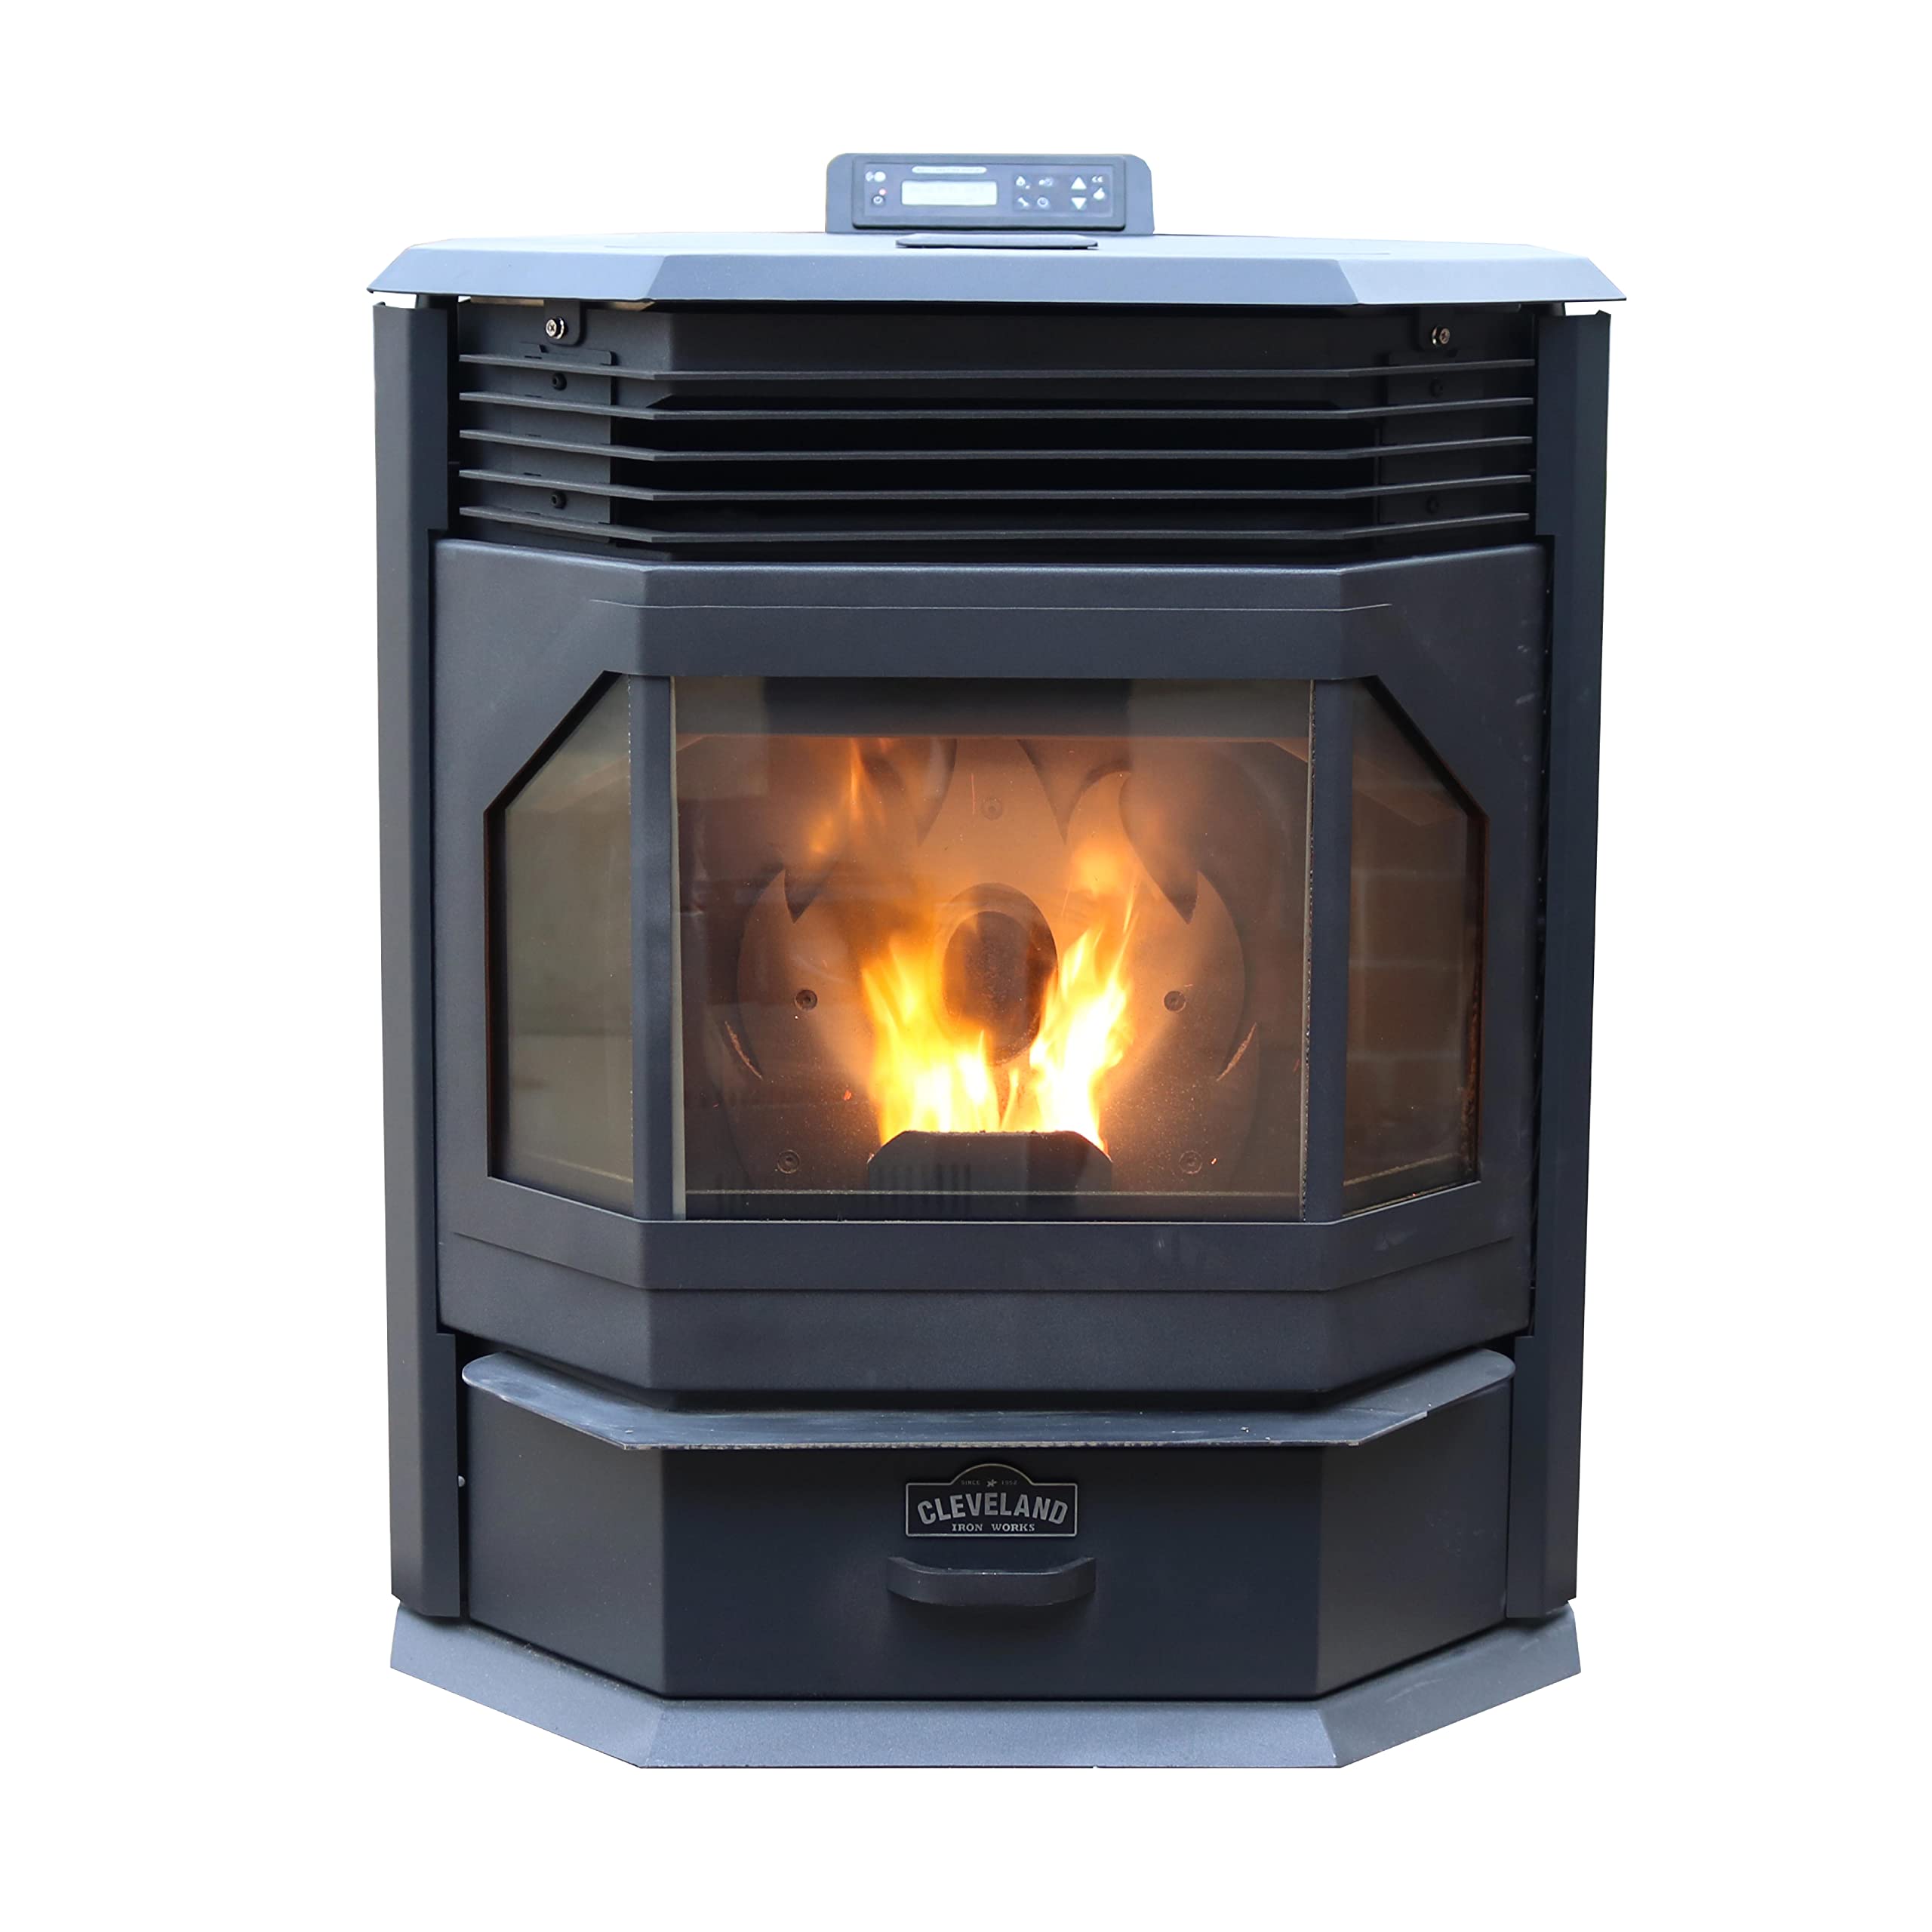 Cleveland Iron Works PSBF66W-CIW Bayfront Pellet Stove